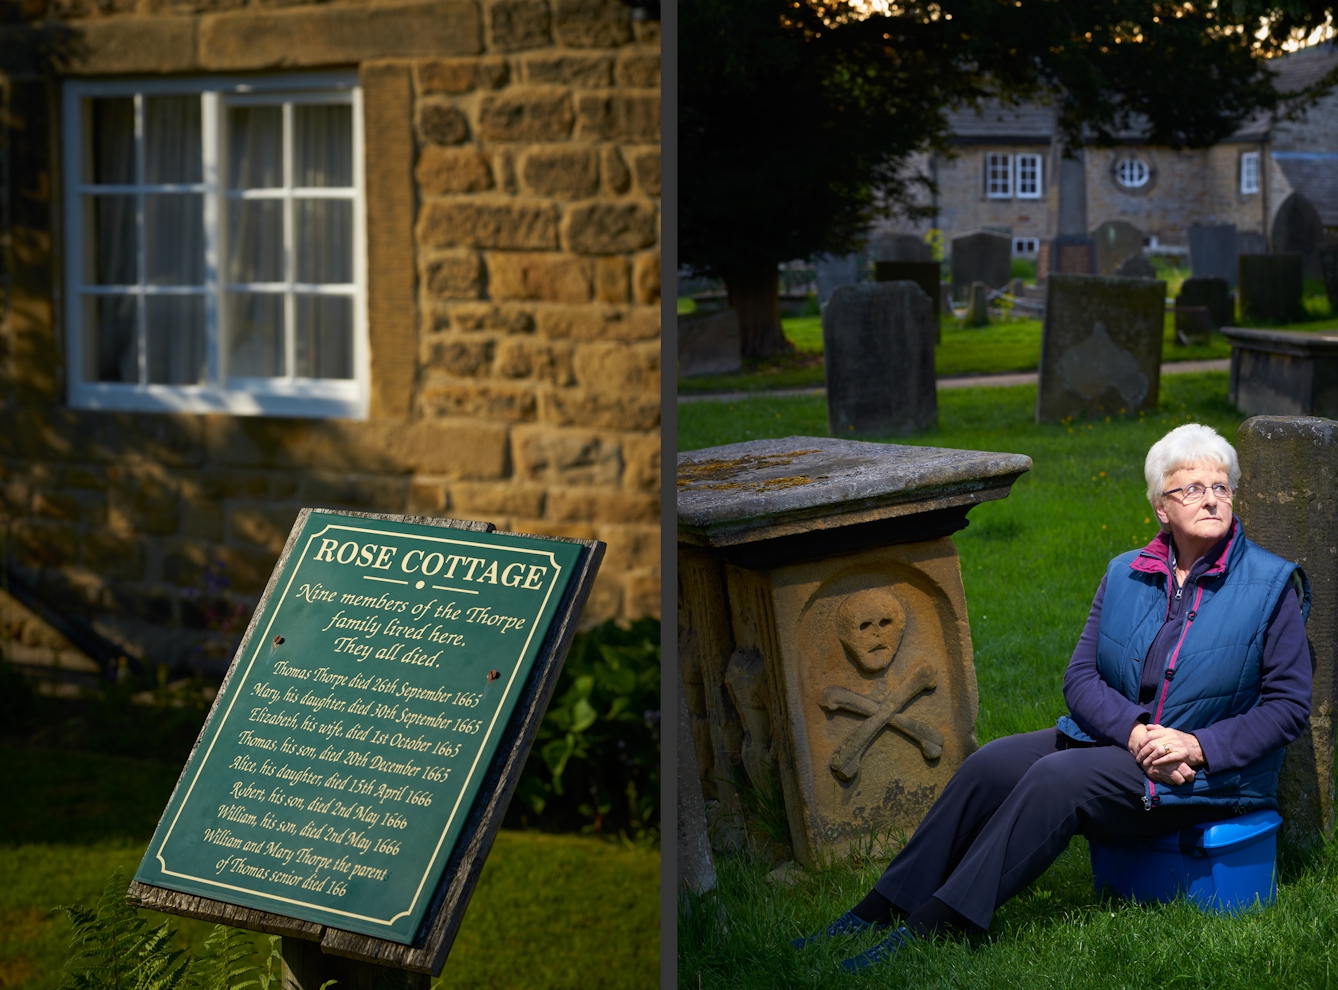 Photographic diptych showing on the left a green plaque outside a stone house title, 'Rose Cottage, Nine members of the Thorpe family lived here. They all died'. On the right is a photographic portrait of an older lady sat by a gravestone bearing a skull and cross bone.